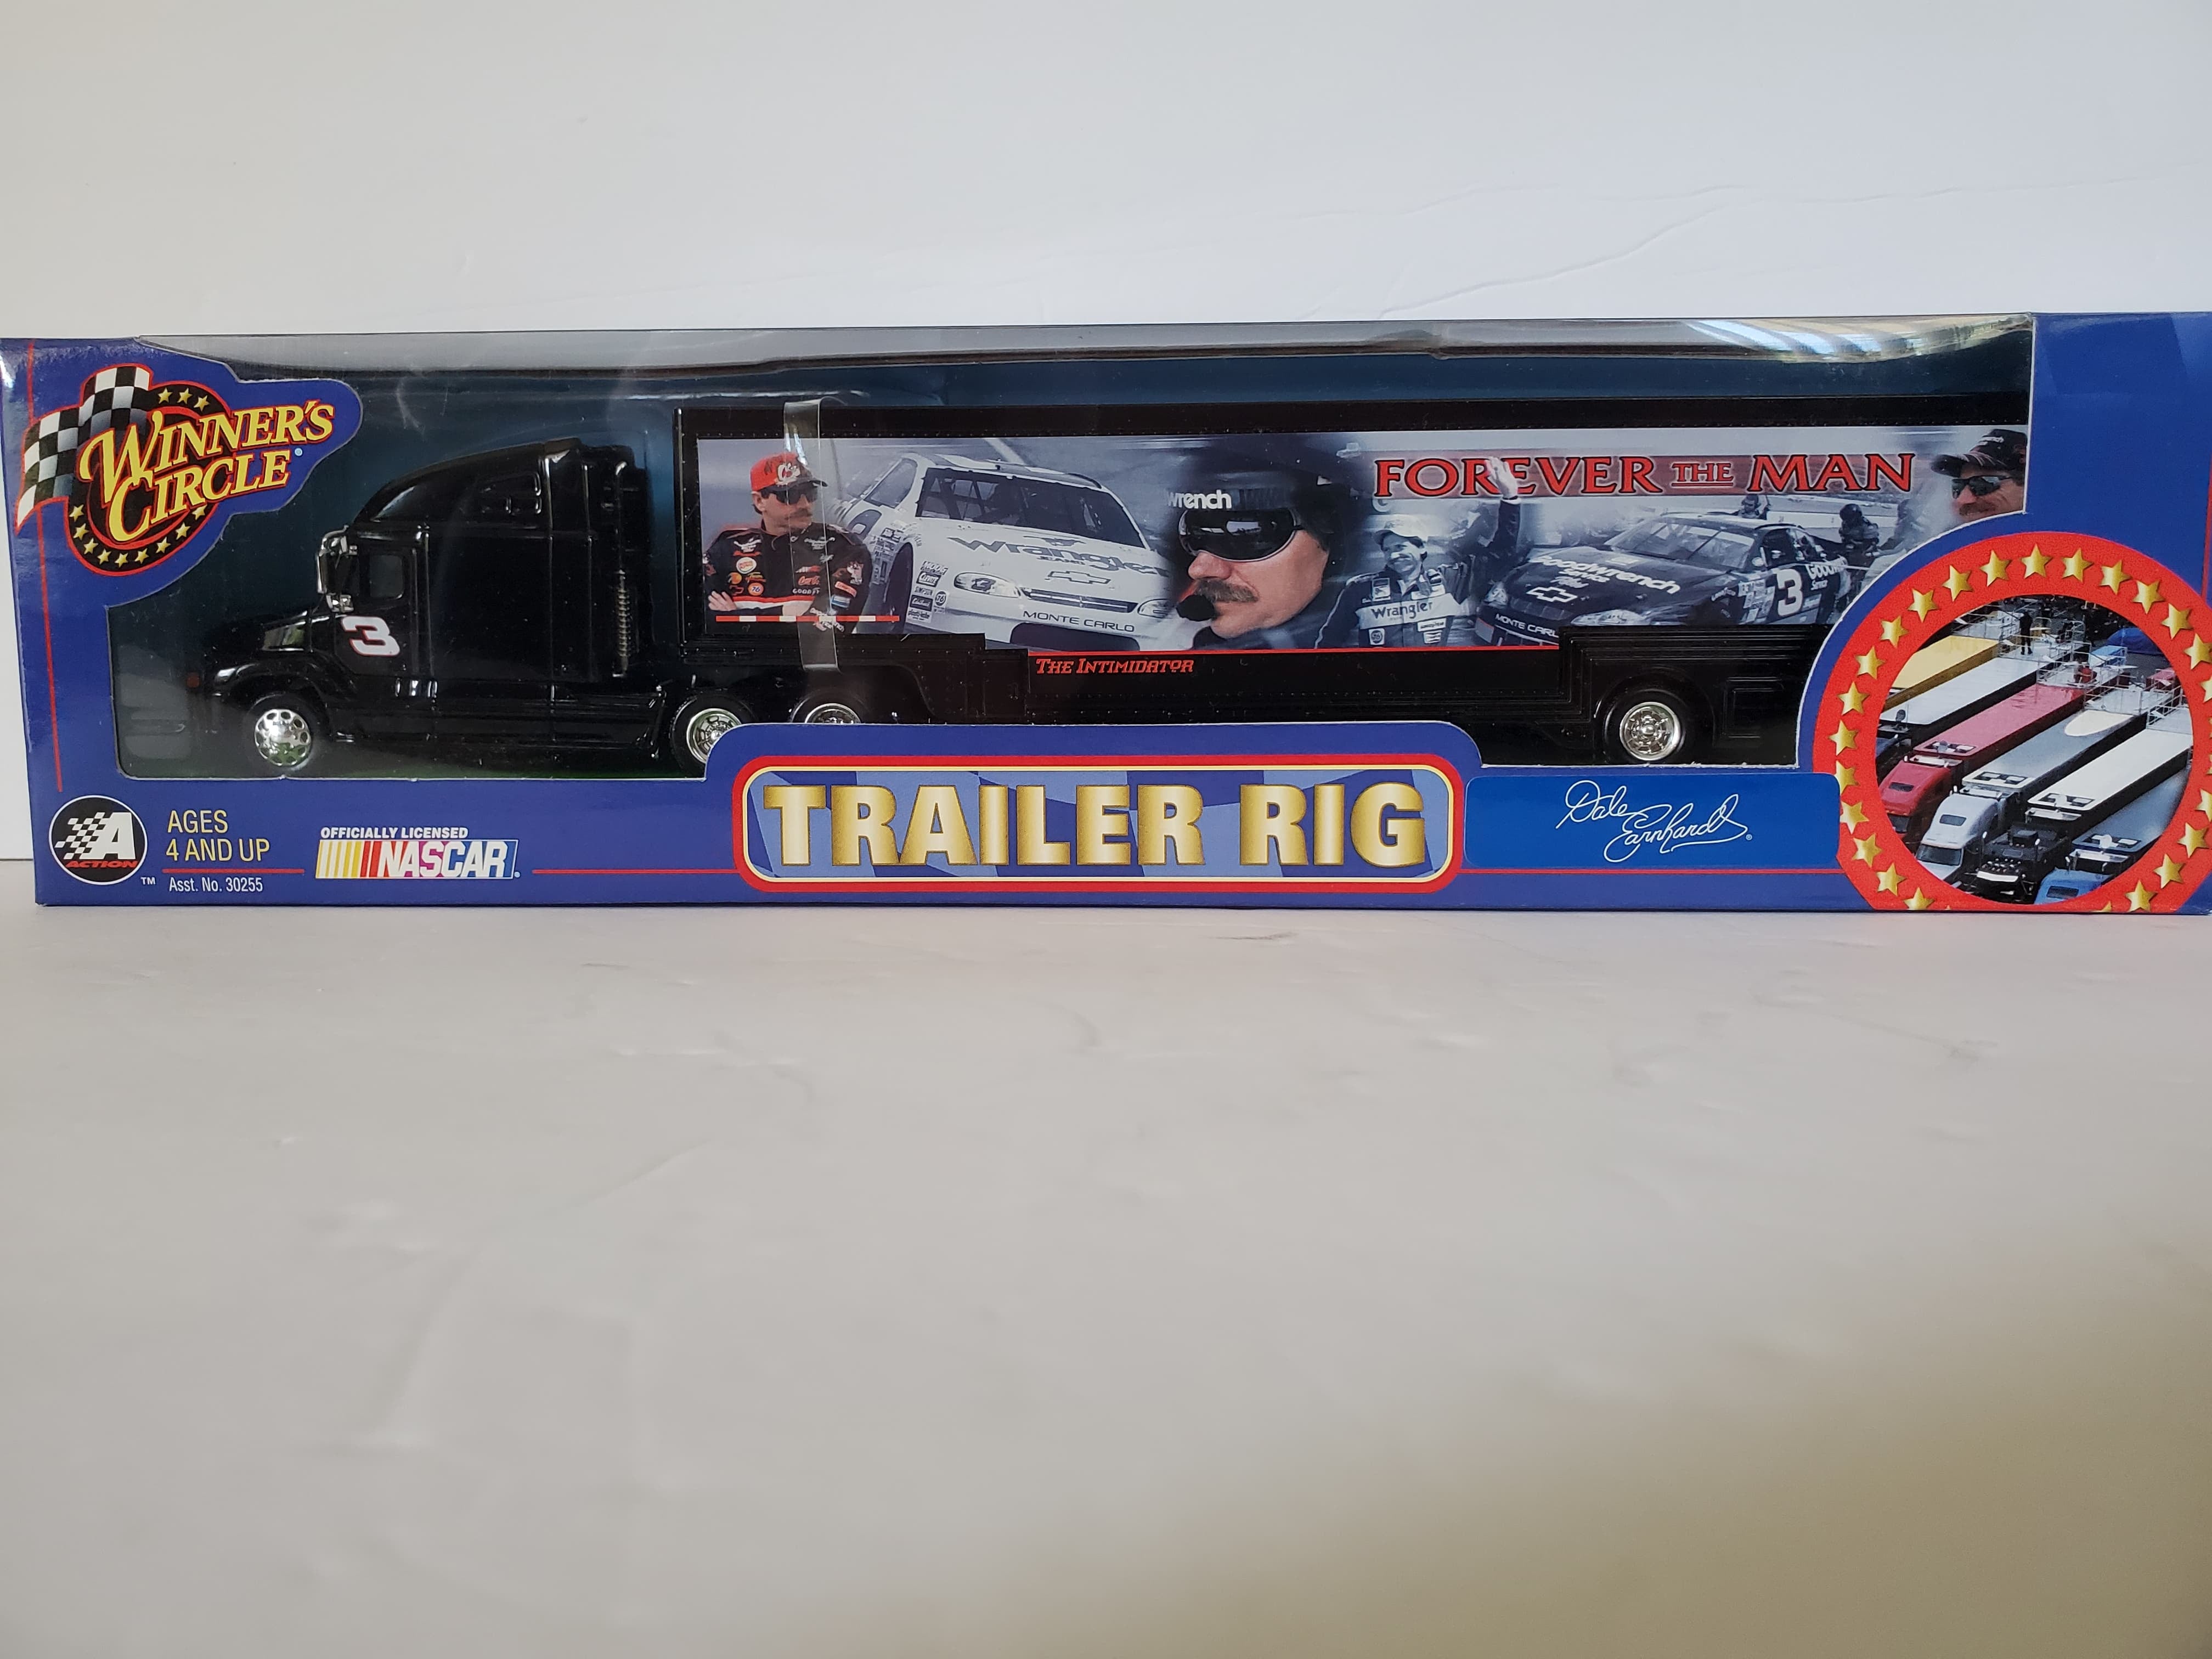 2002 WINNERS CIRCLE - "FOREVER THE MAN" DALE EARNHARDT HAULER - 1/64 Diecast - Second hand - SH026